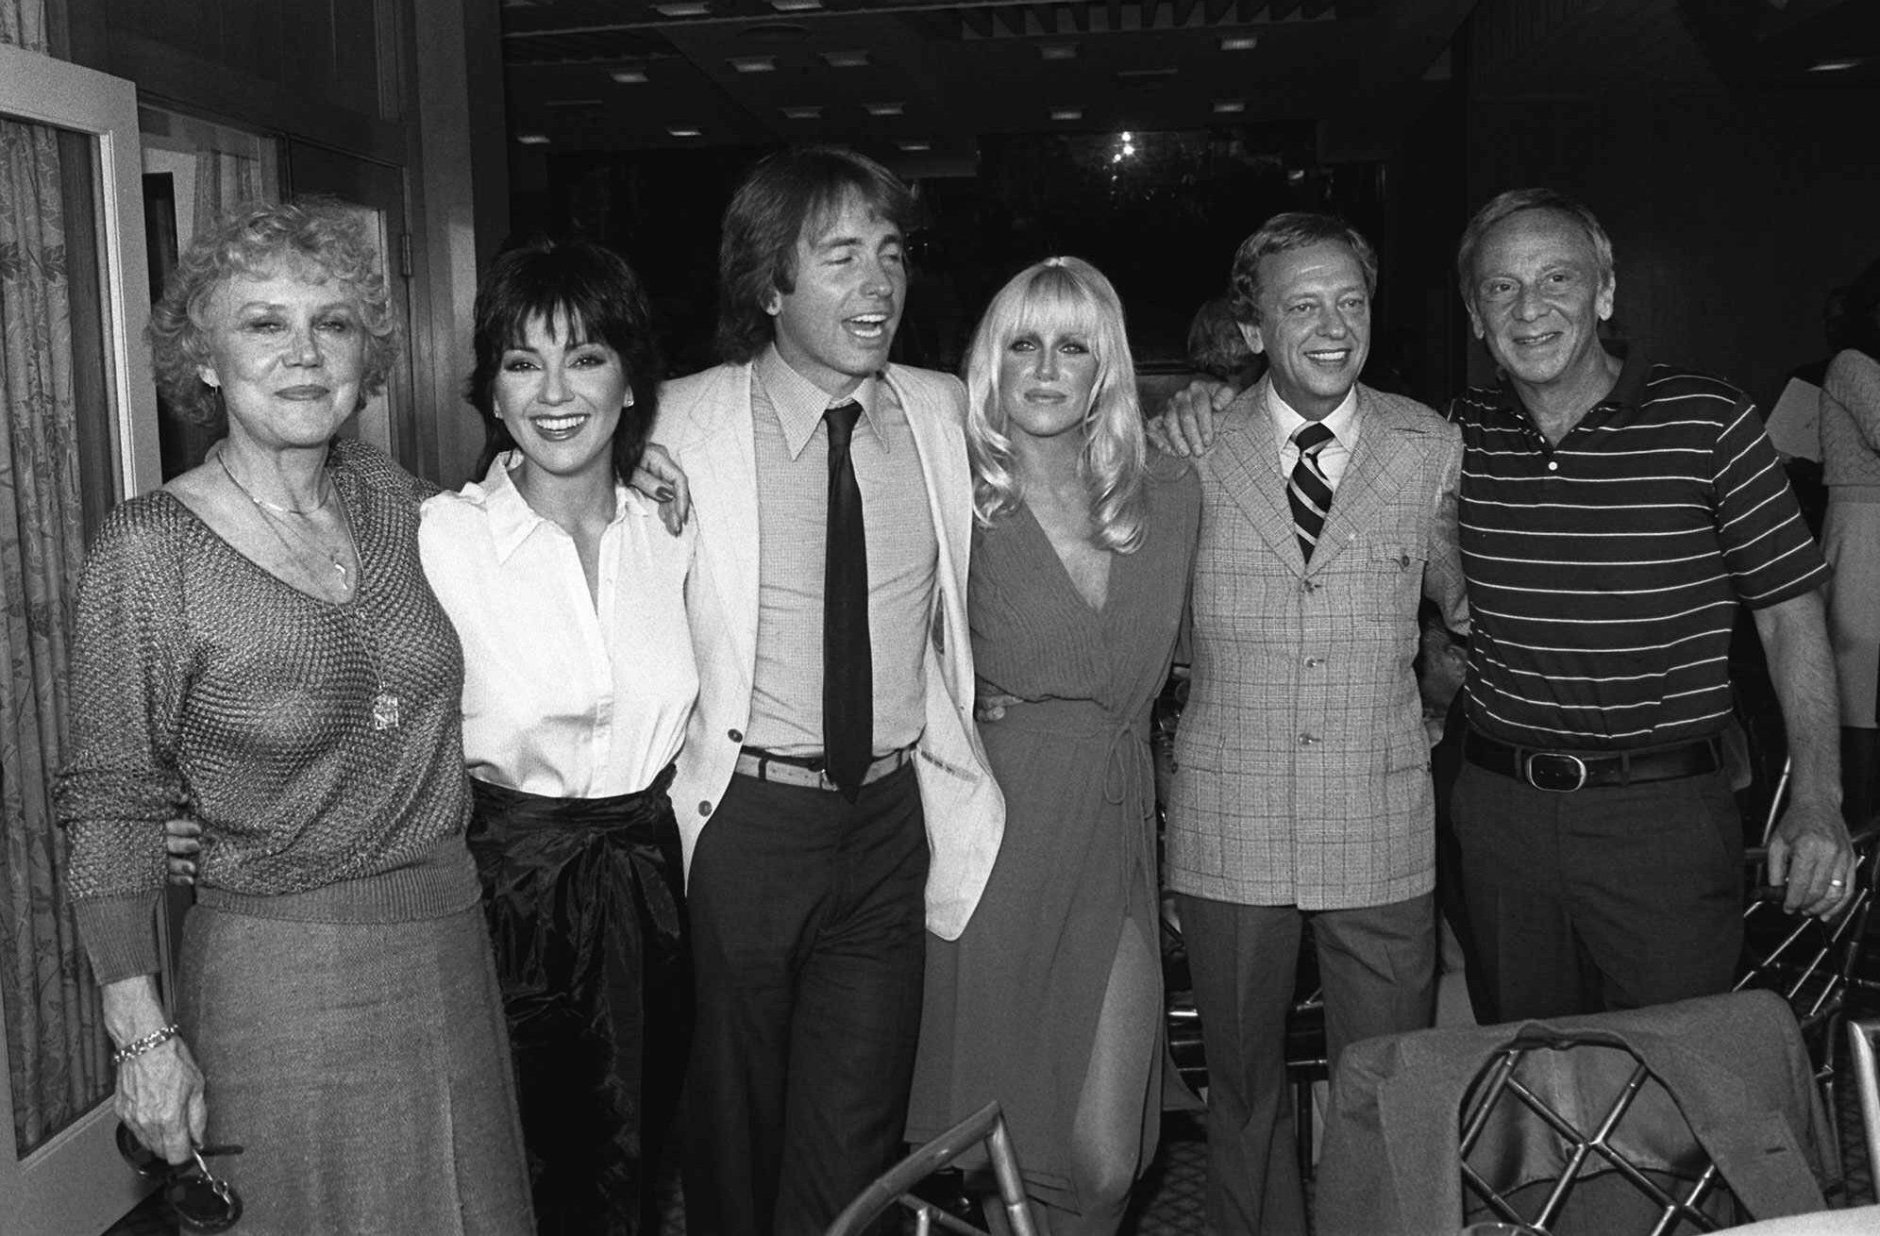 Actor Norman Fell, far right, who played the irritable landlord Stanley Roper on the 1970s television sitcom ``Three's Company,'' is shown with cast of the show in Los Angeles in this 1979 photo. Seen, from left, are: actors Audra Lindley; Joyce DeWitt; John Ritter; Suzanne Somers; Don Knotts; and Fell. (AP Photo)